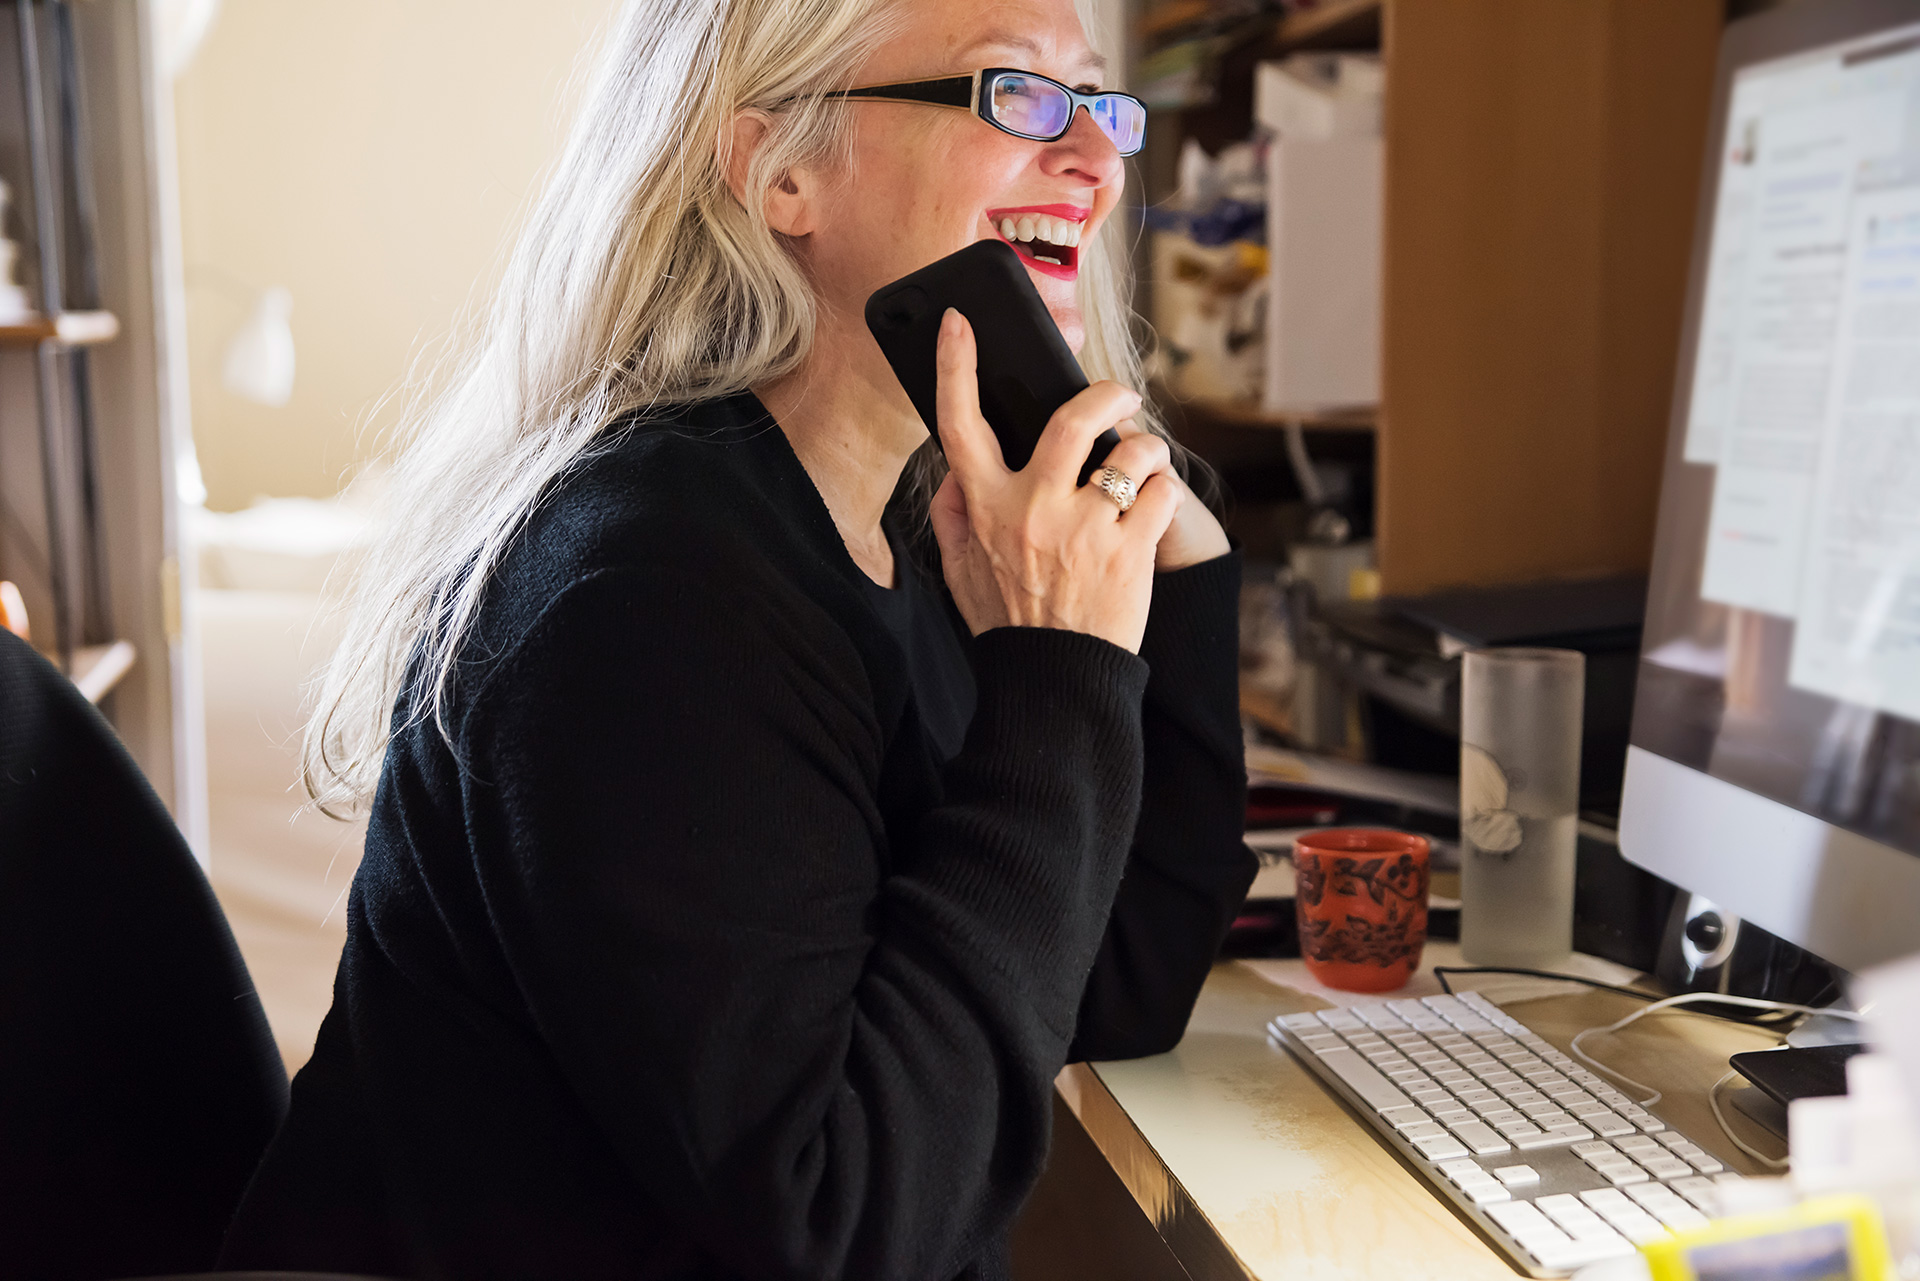 A woman sitting at a desk in front of a computer, laughing while she's on the phone.